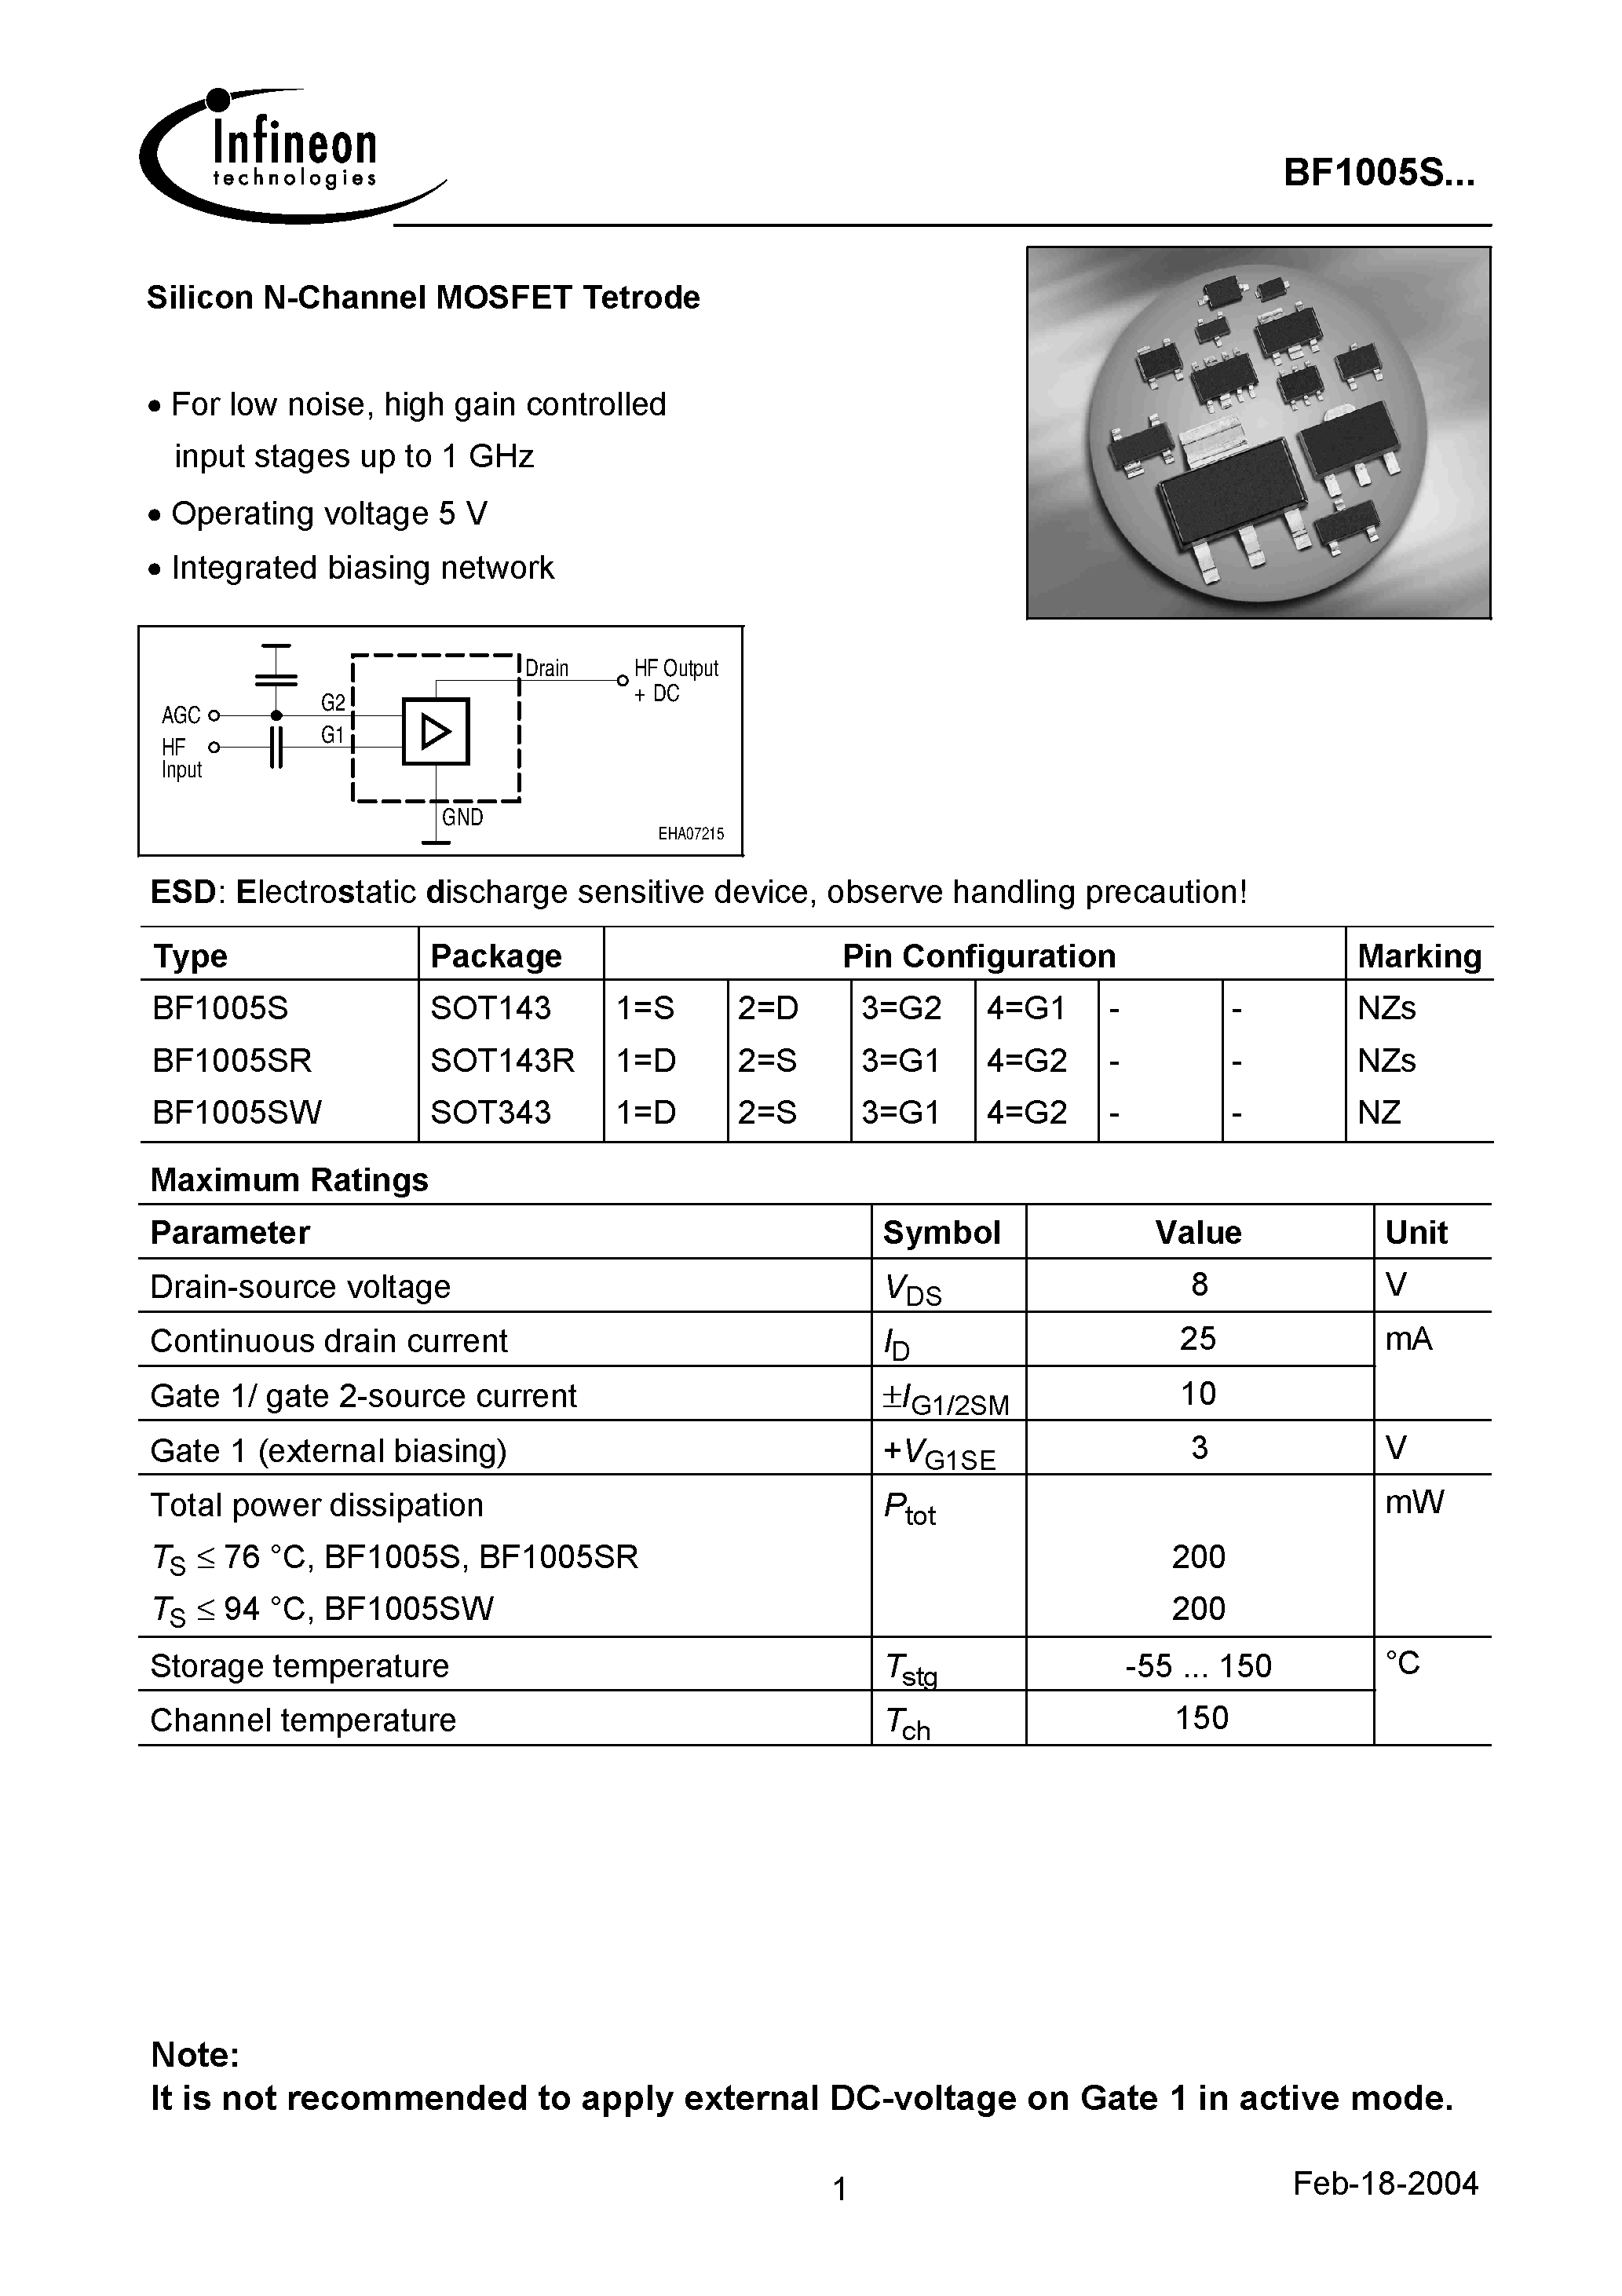 Даташит BF1005SW - Silicon N-Channel MOSFET Tetrode страница 1